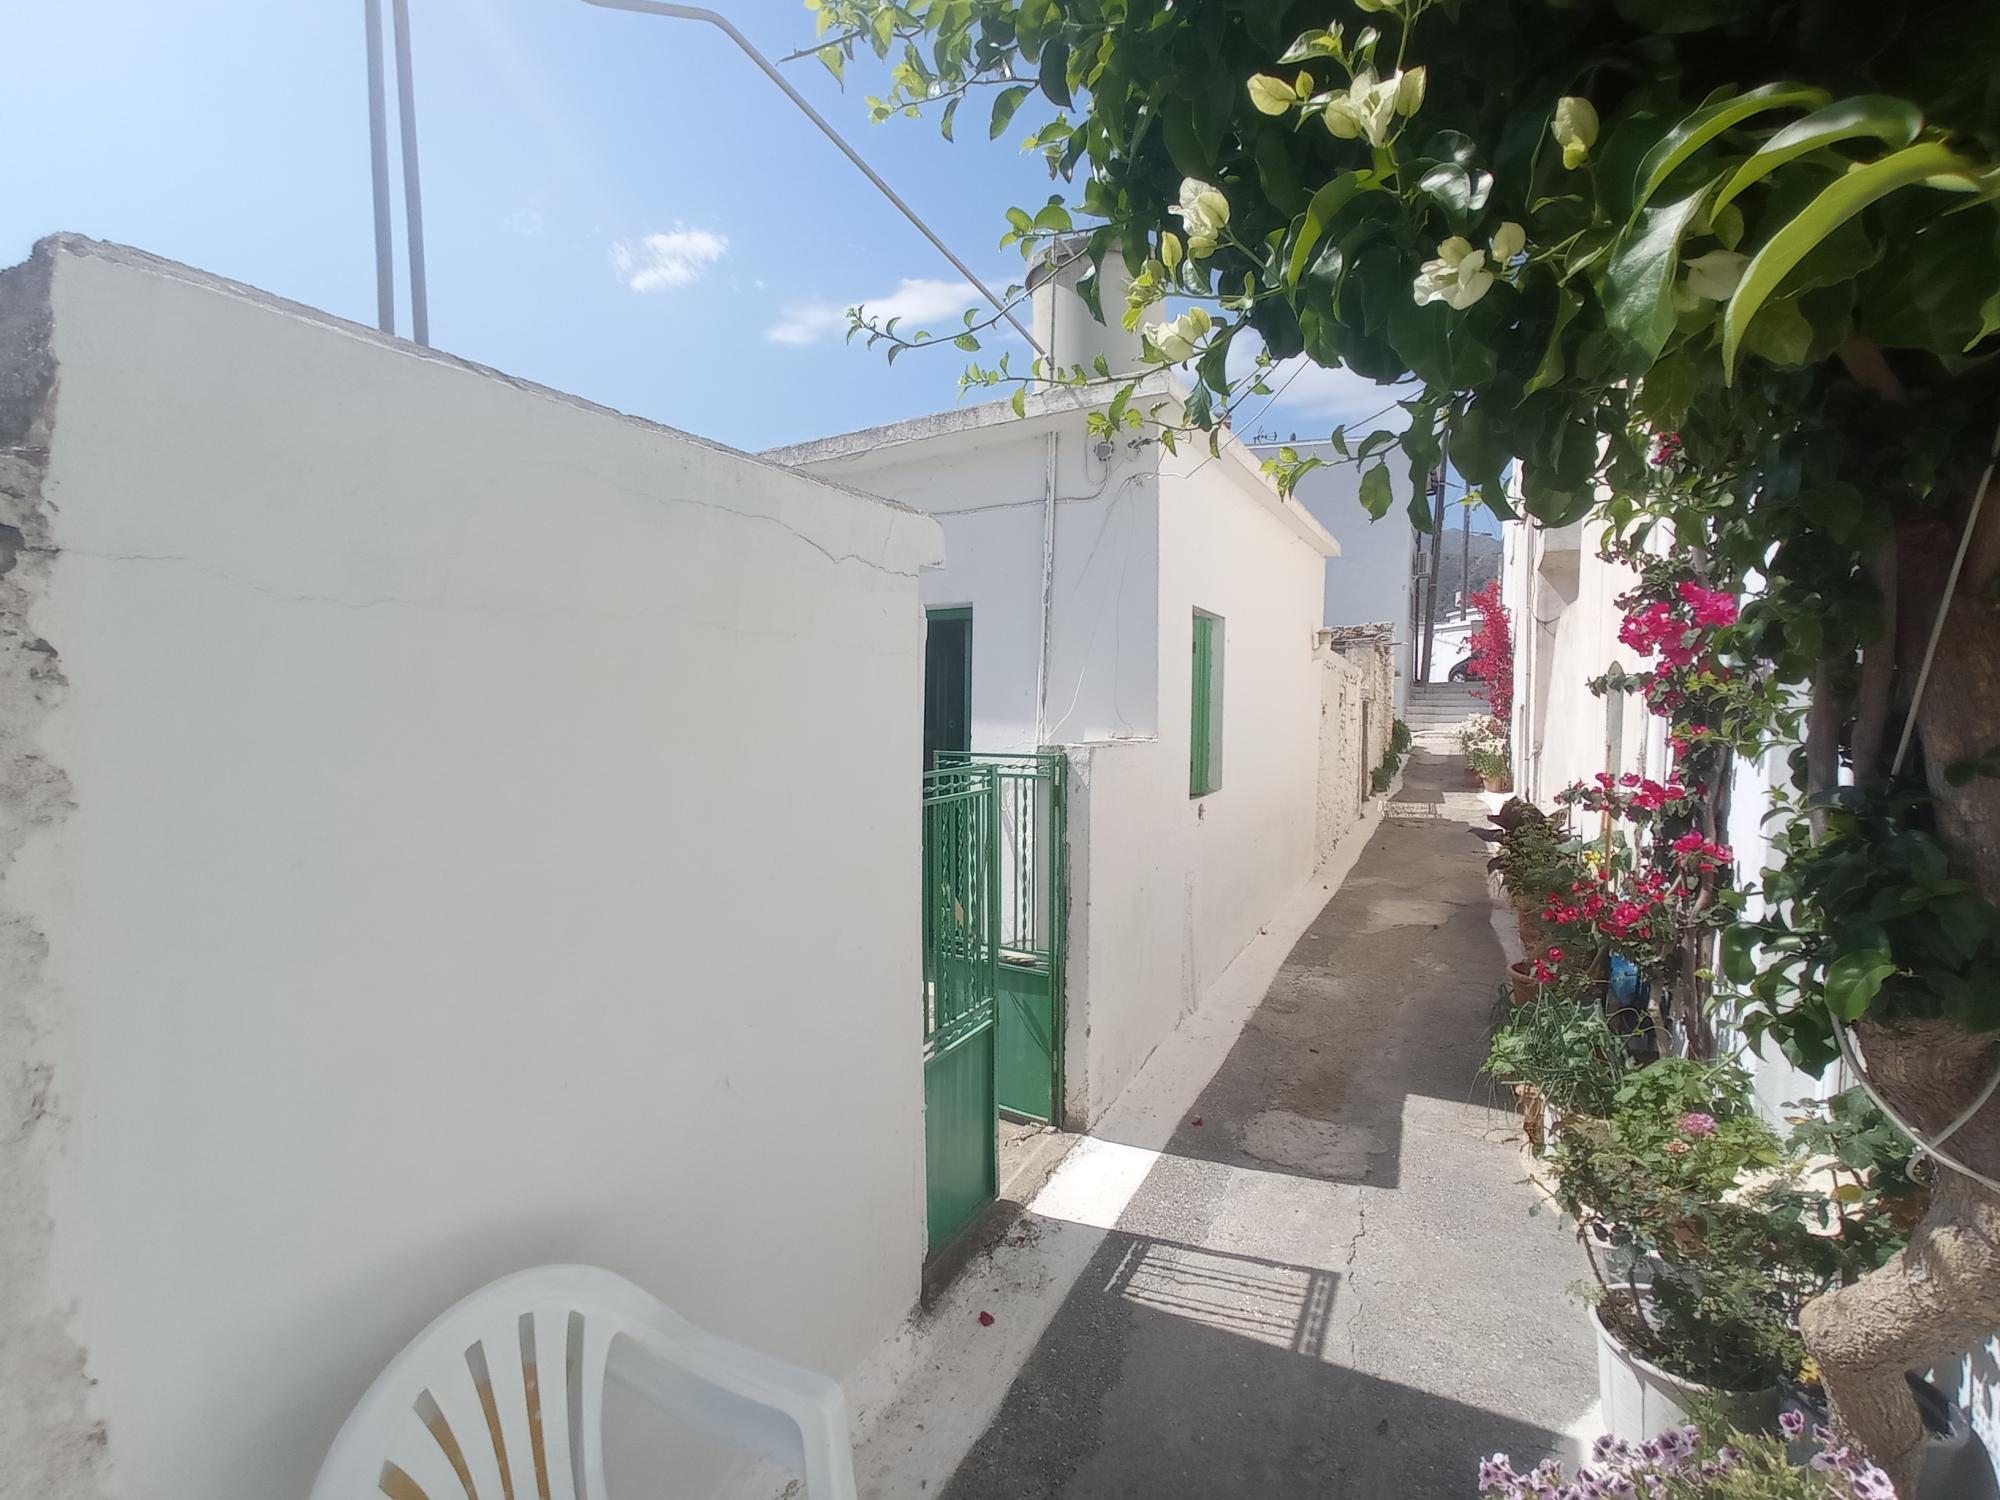 Traditional 2 bedroom house with small garden in pretty village.